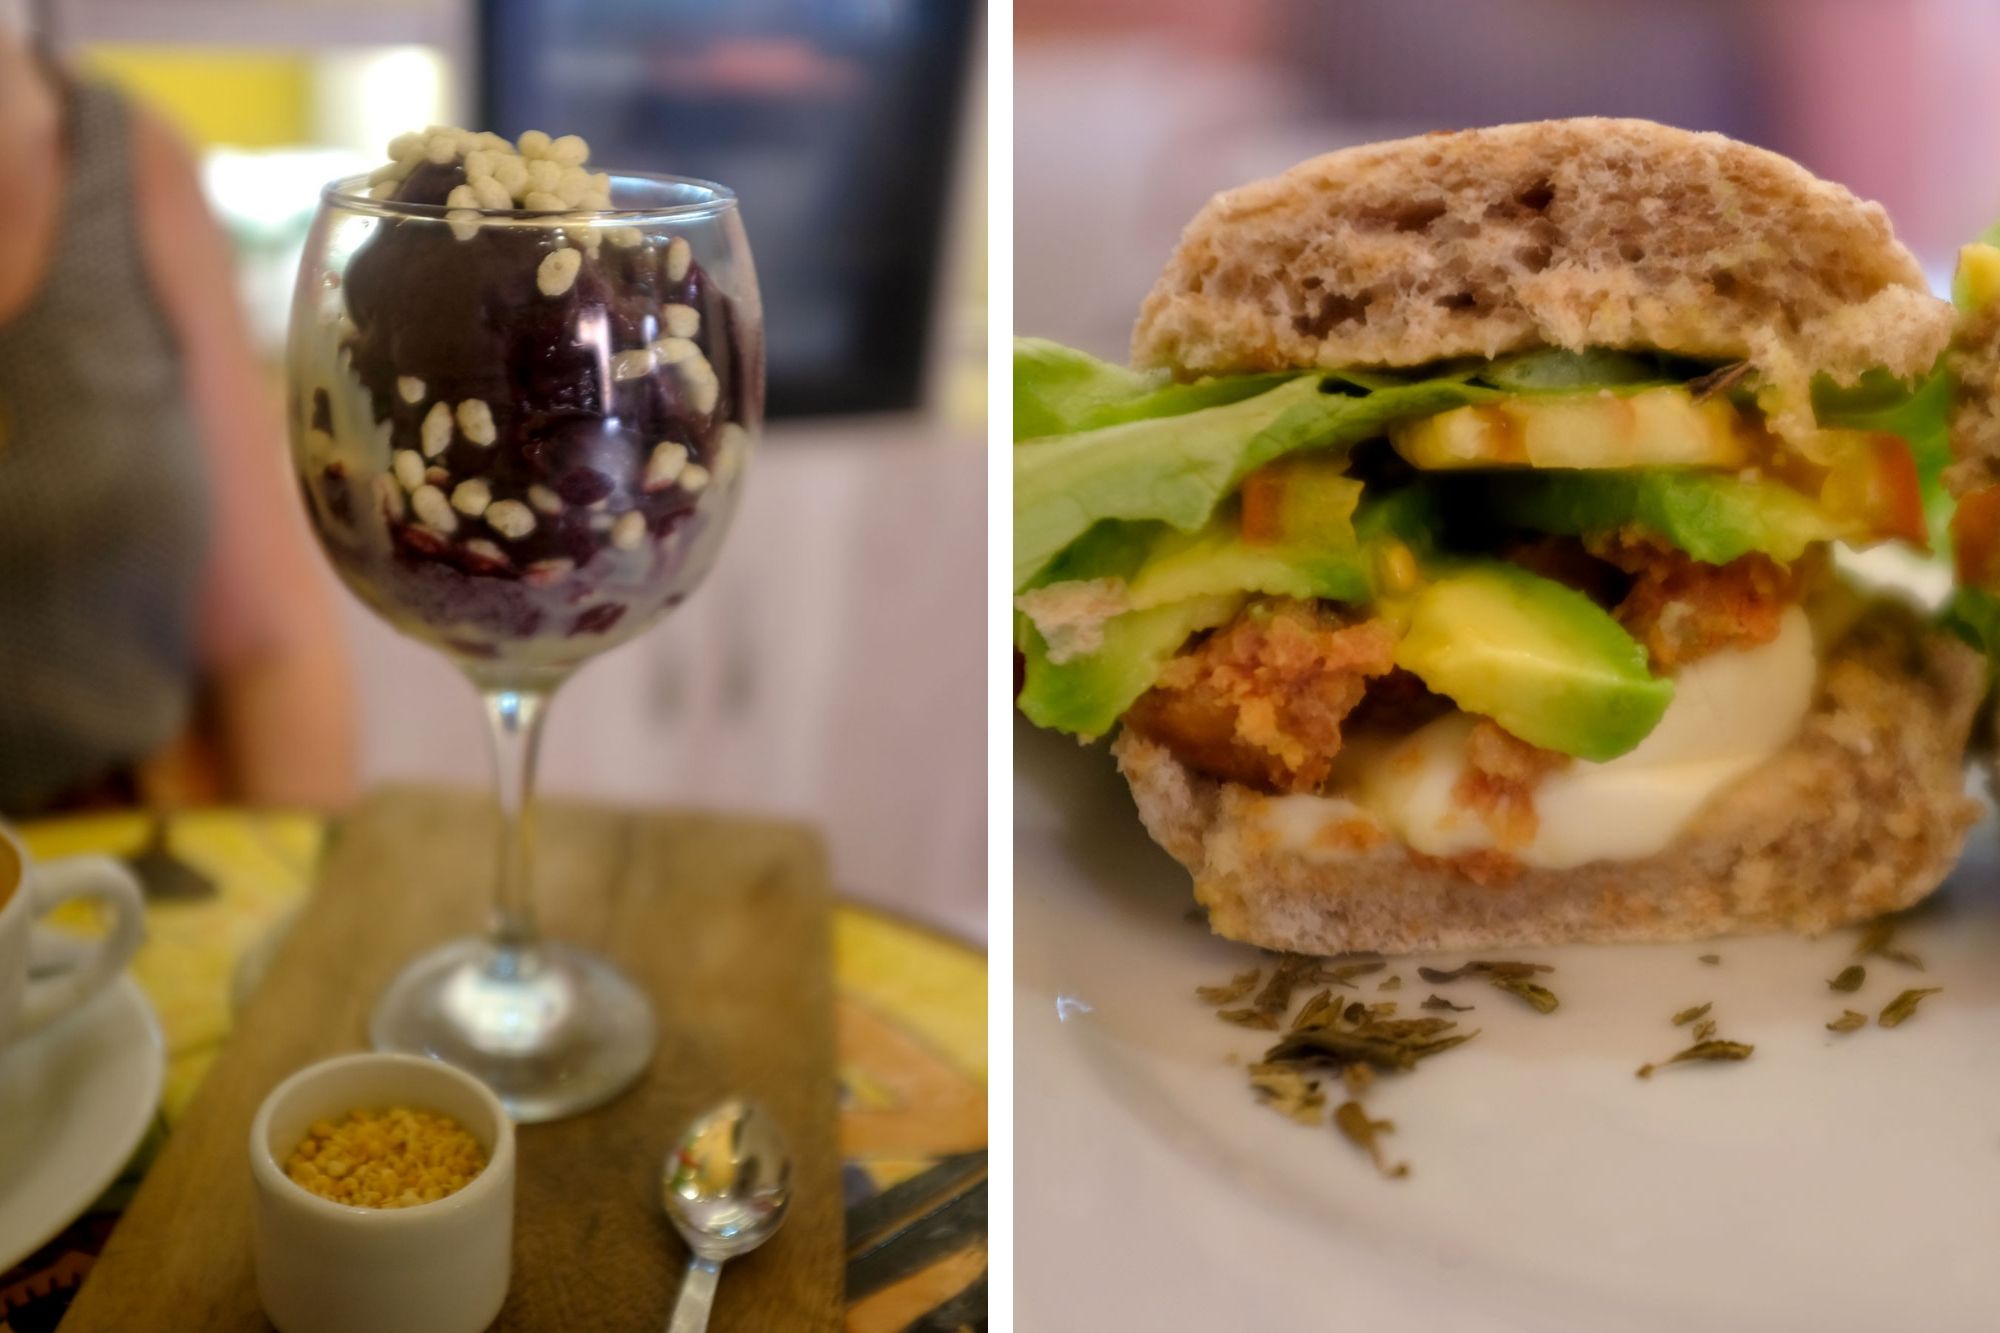 Collage of our meals: a wine glass with an acai blend and puffed rice, and a chorizo sandwich with avocado